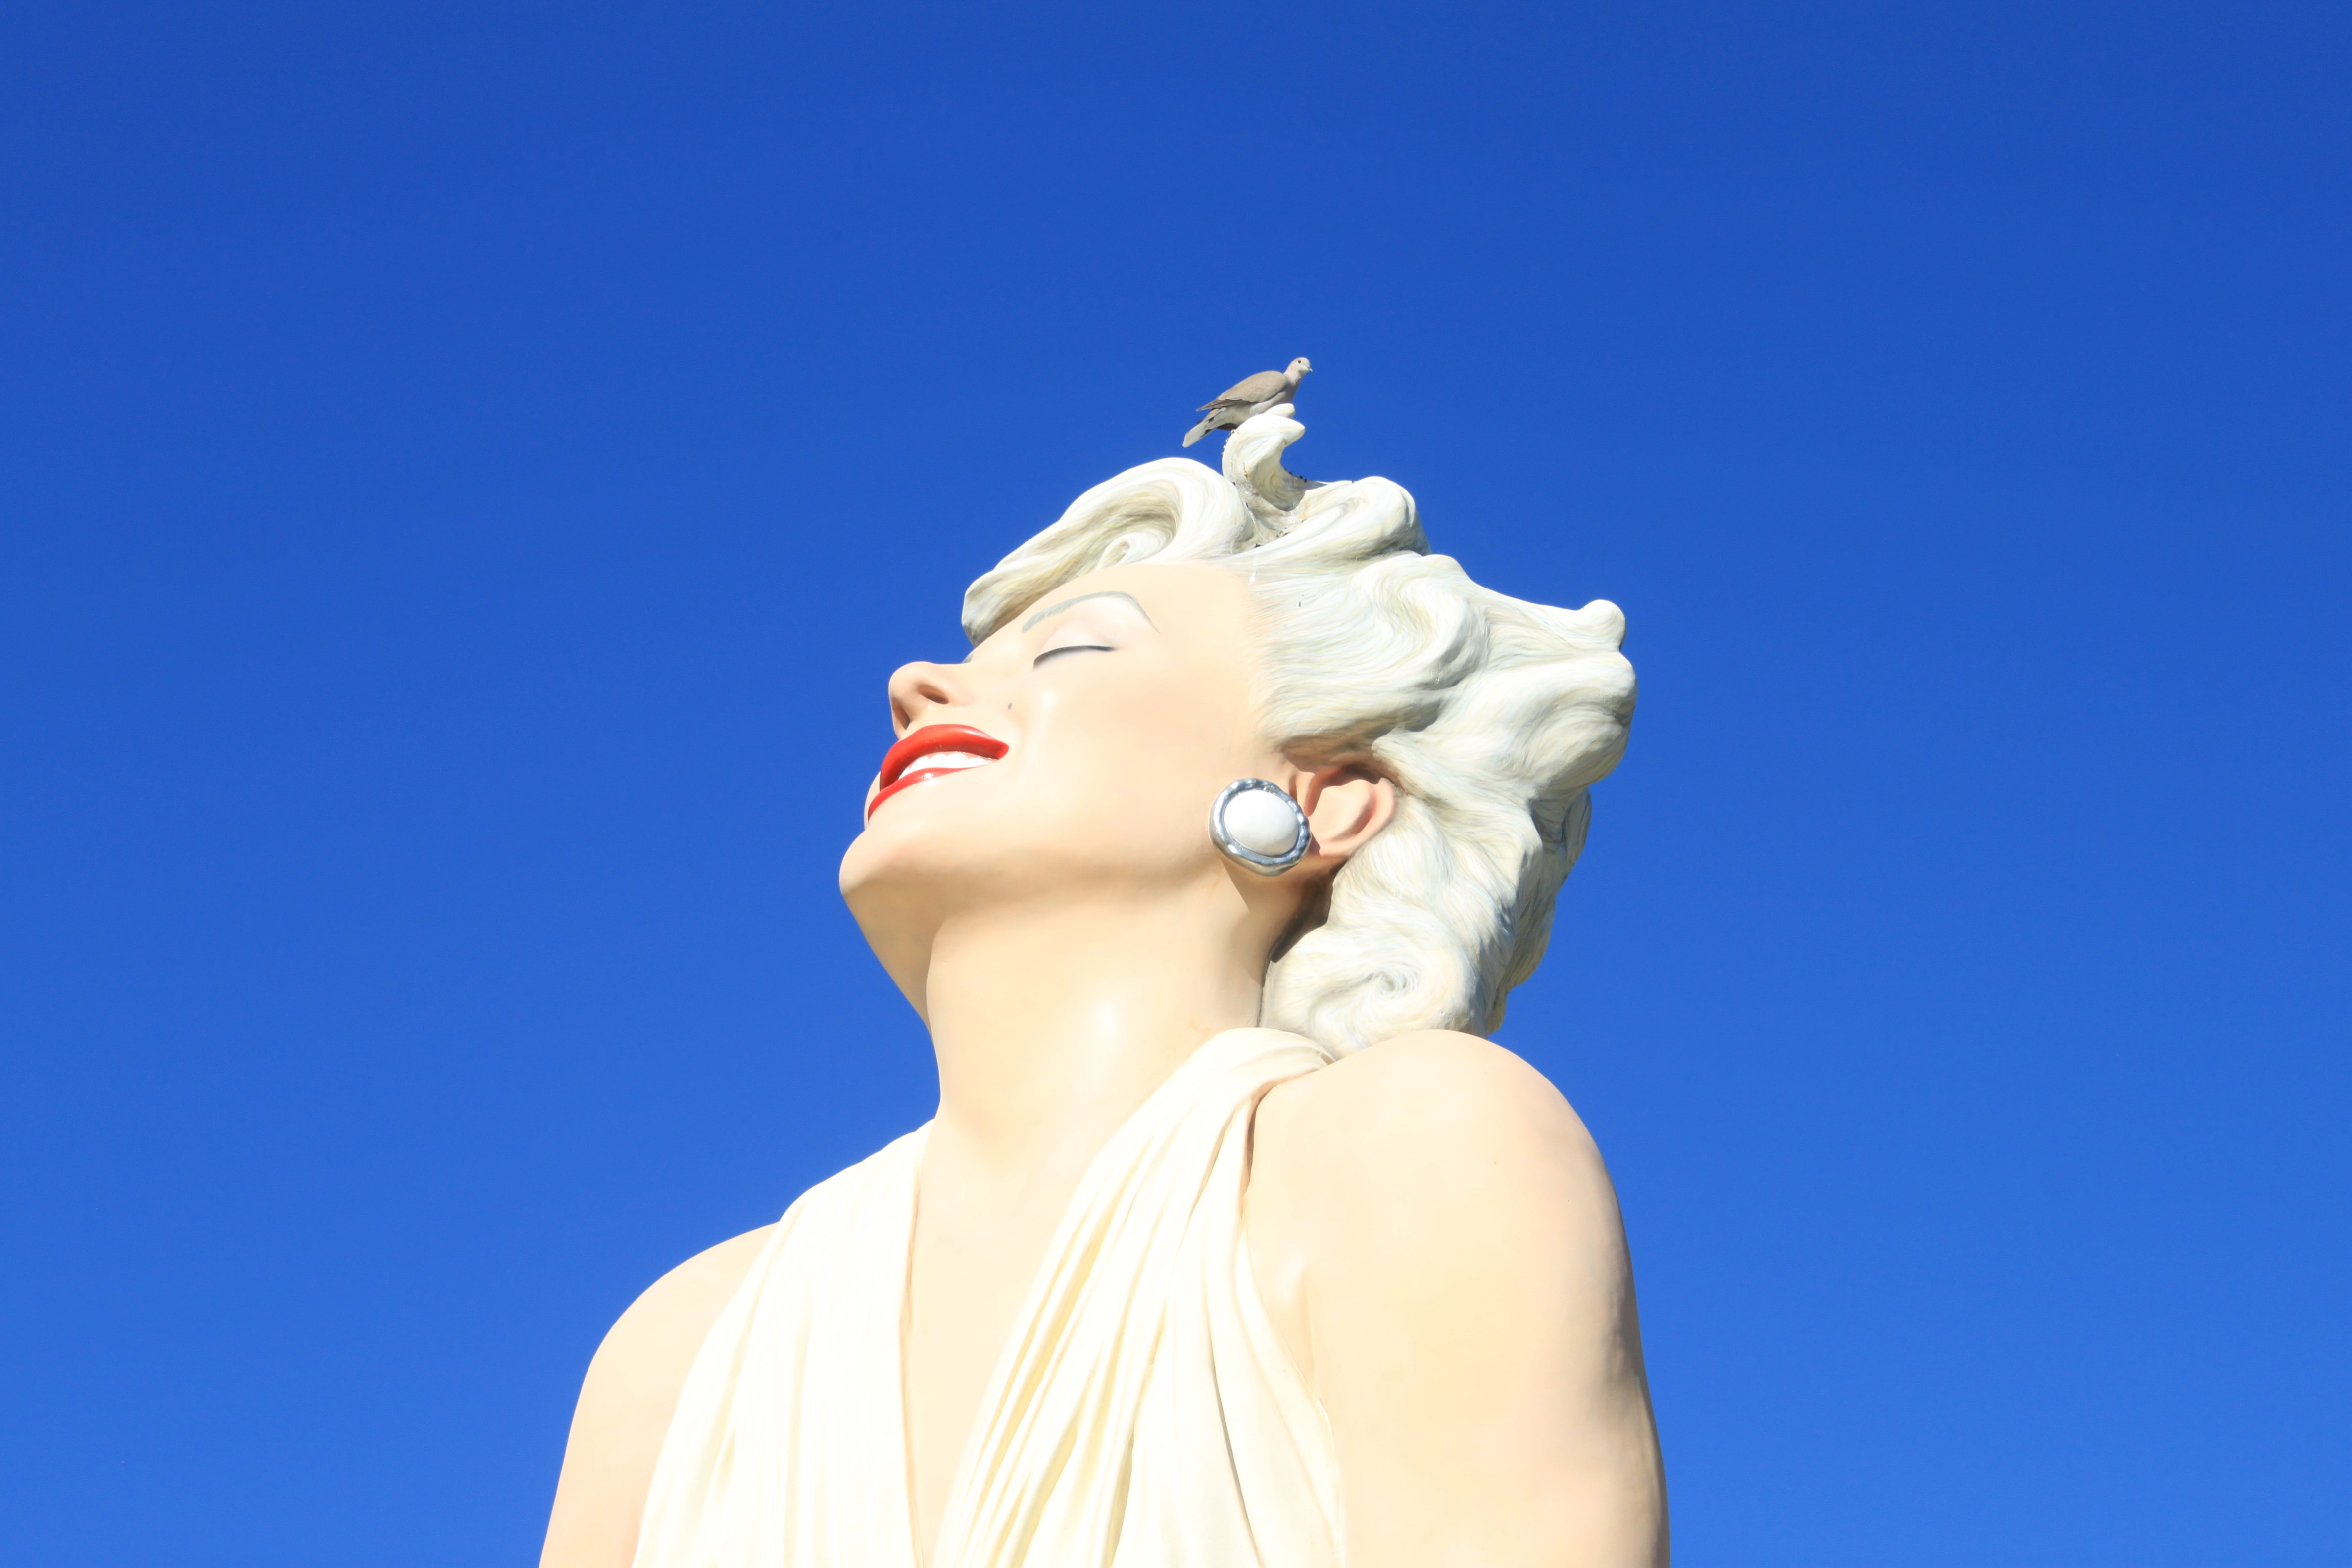 The head of the statue is photographed from below smiling against a bright blue sky and with a bird perched on top. 